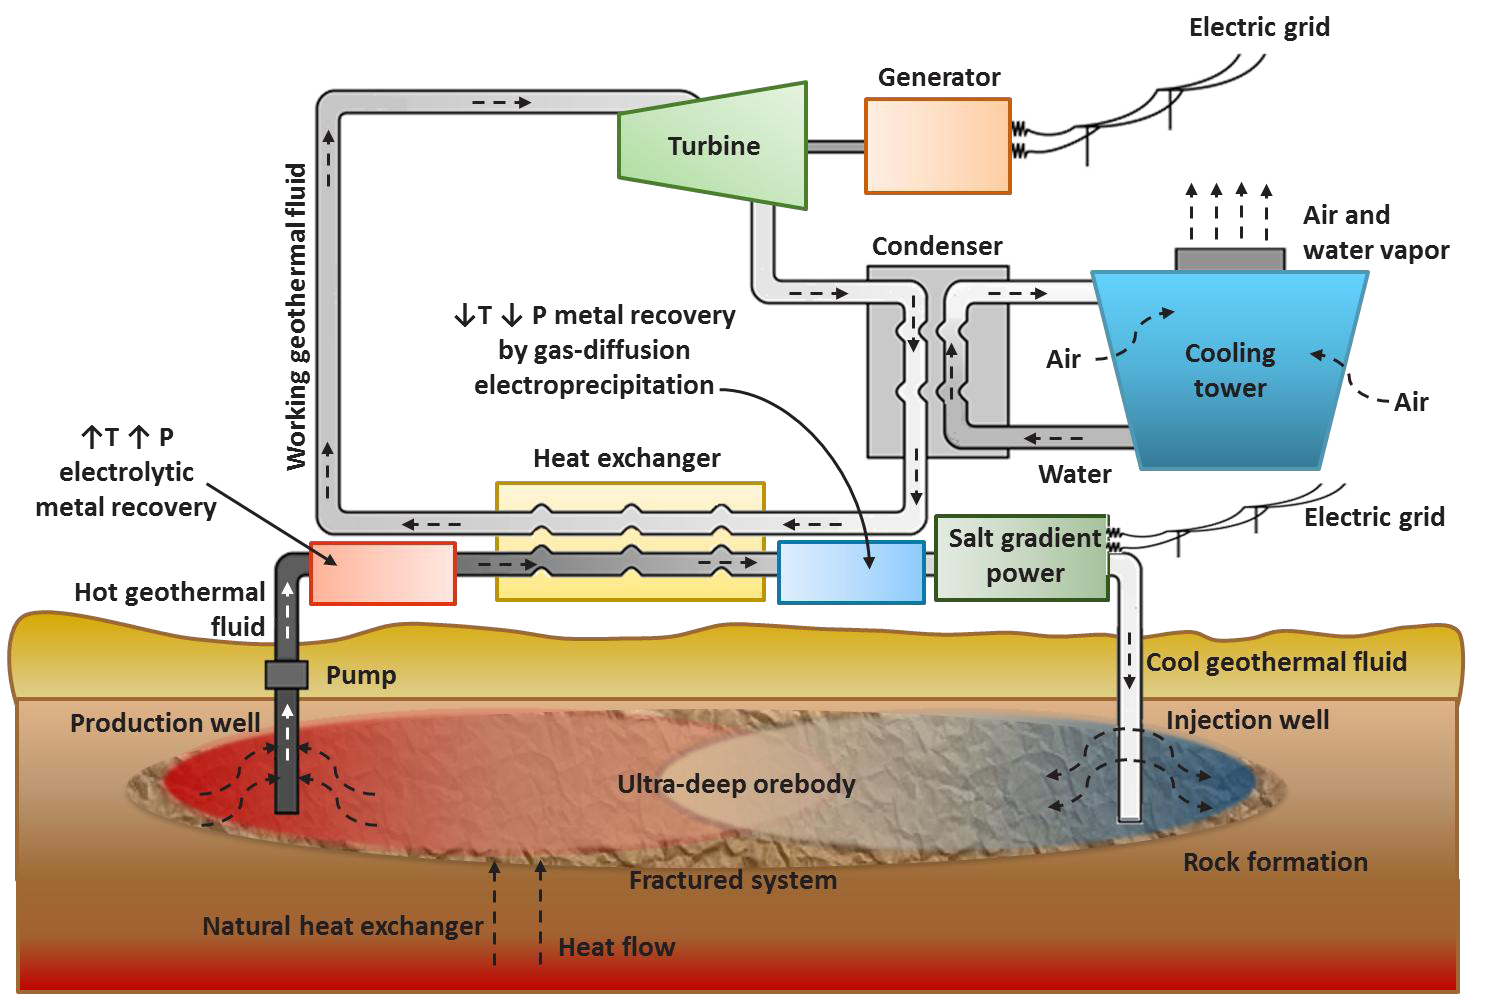 Science & Technology: Project Uses Enhanced Geothermal Systems for